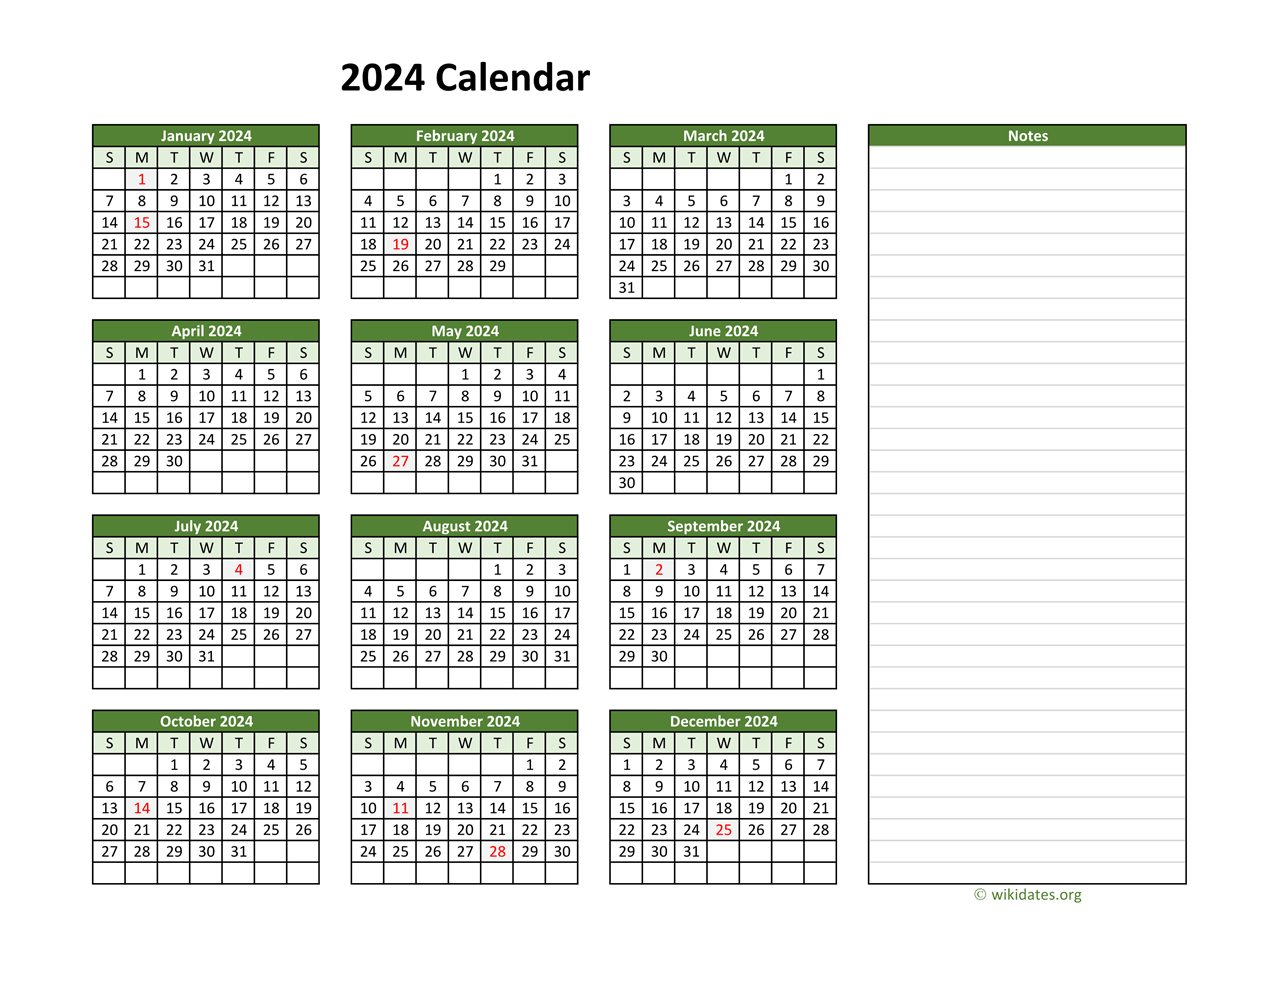 Yearly Printable 2024 Calendar With Notes | Wikidates for Free Printable 2024 Calendar With Notes